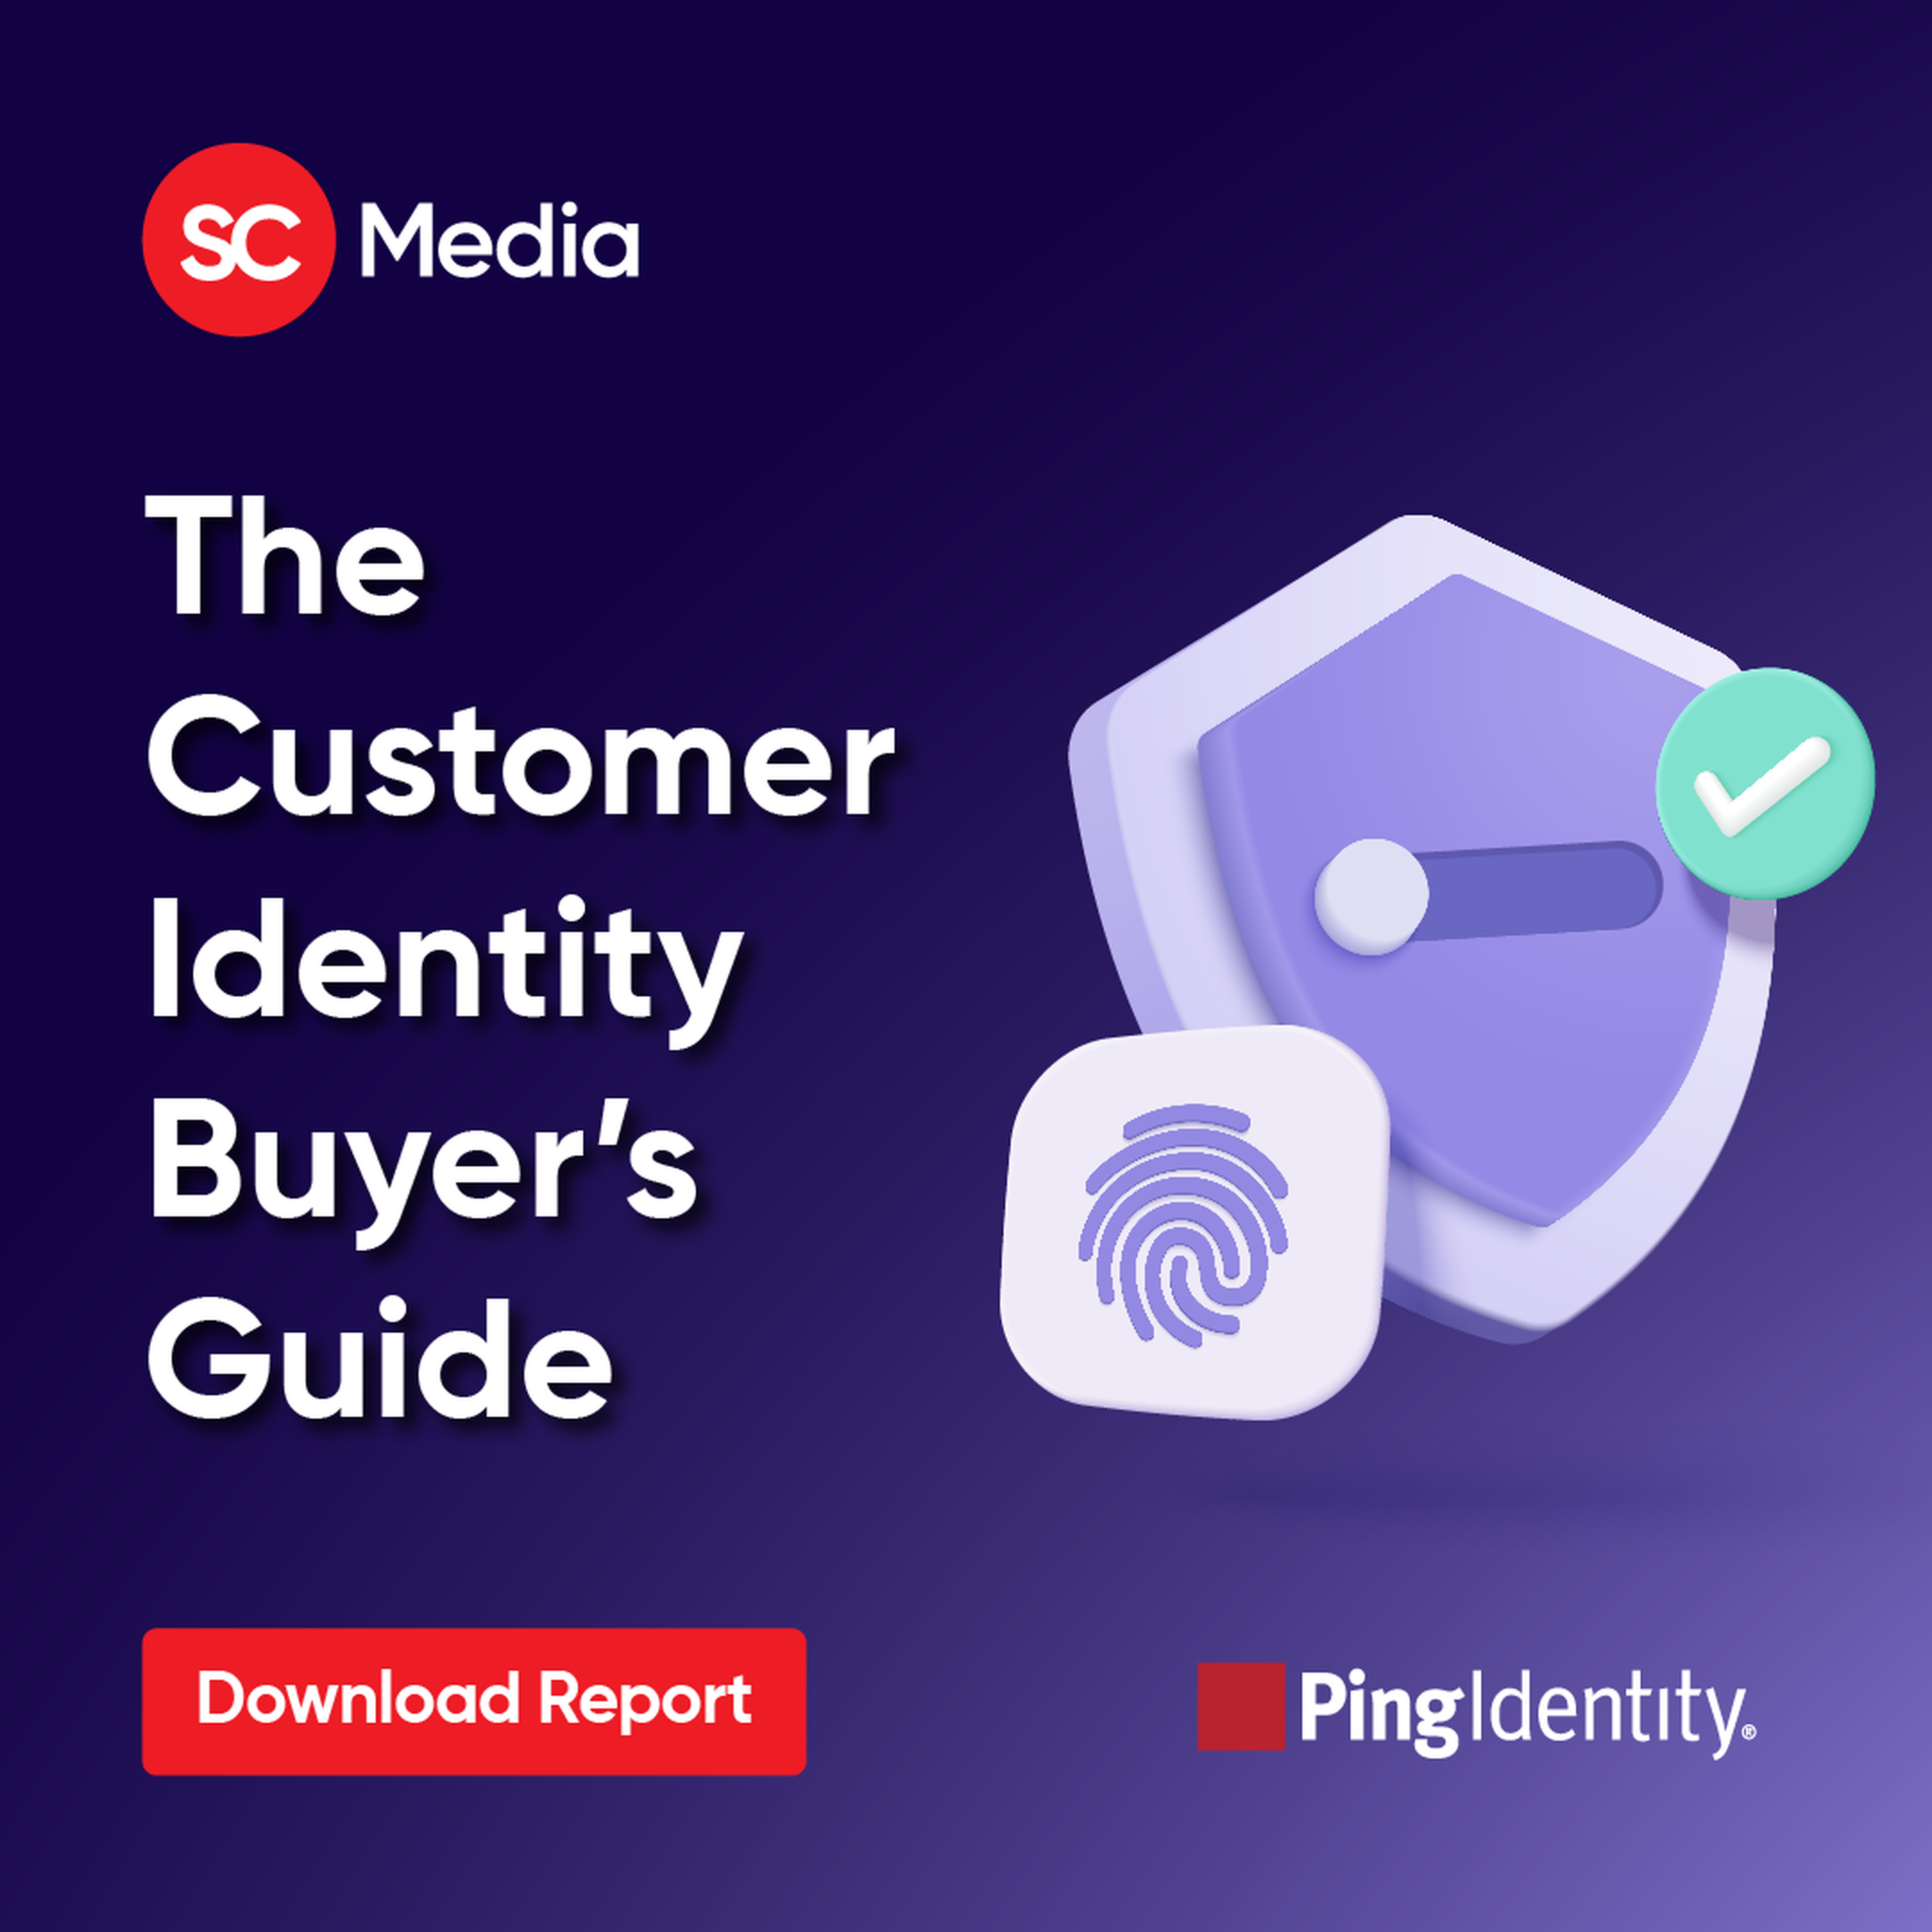 The Customer Identity Buyer’s Guide